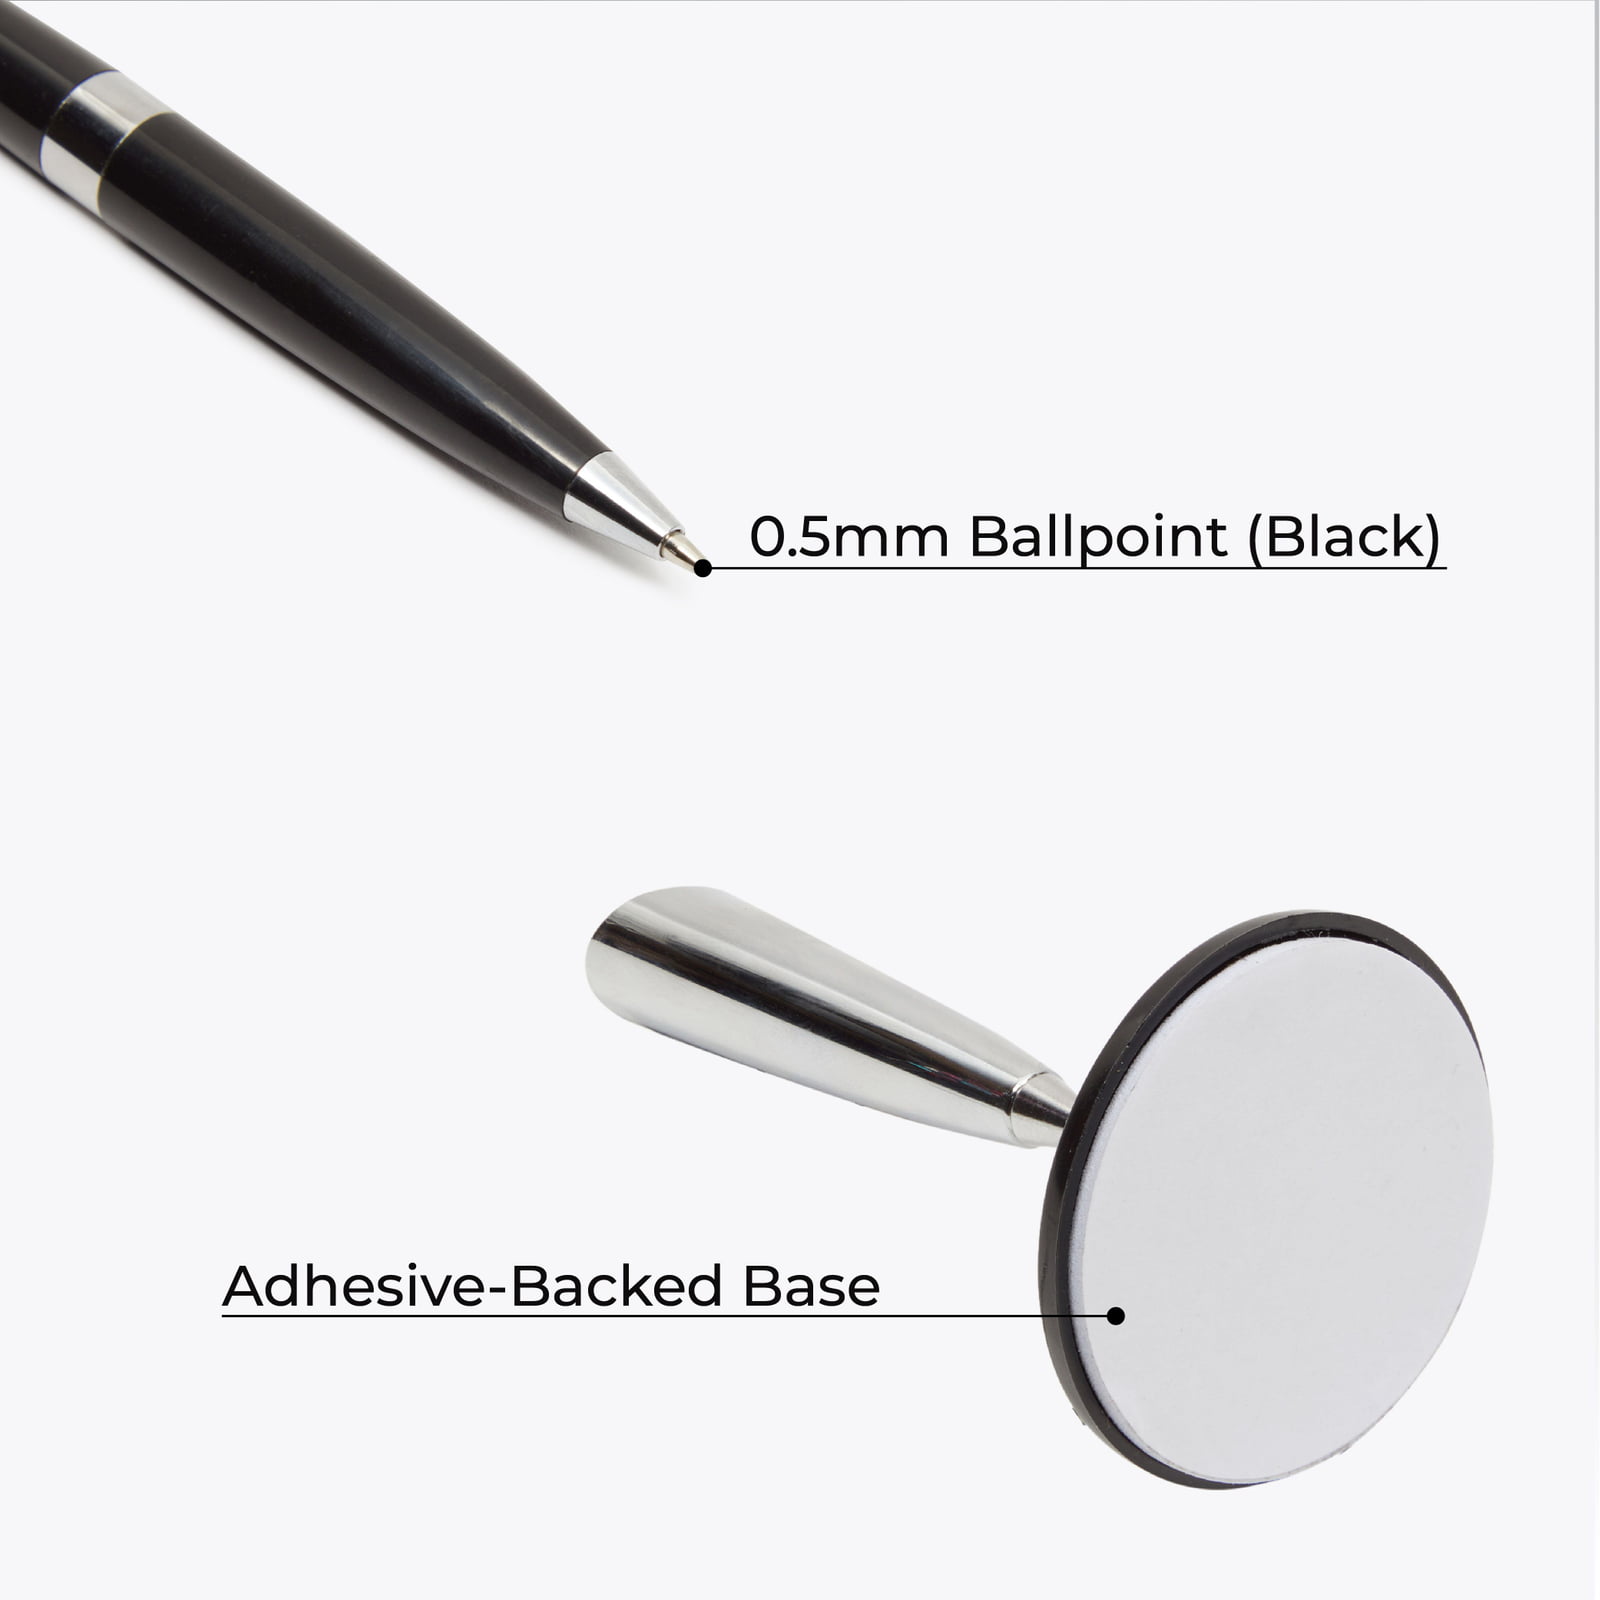 0.5mm Ballpoint Retail Stores Black Security Gel Ink Pens for Bank Office Anti-Theft Pen with Adhesive-Backed Base 3-Pack Counter Pens with Ball Chain Hotel Lobbies Desktop Pen 